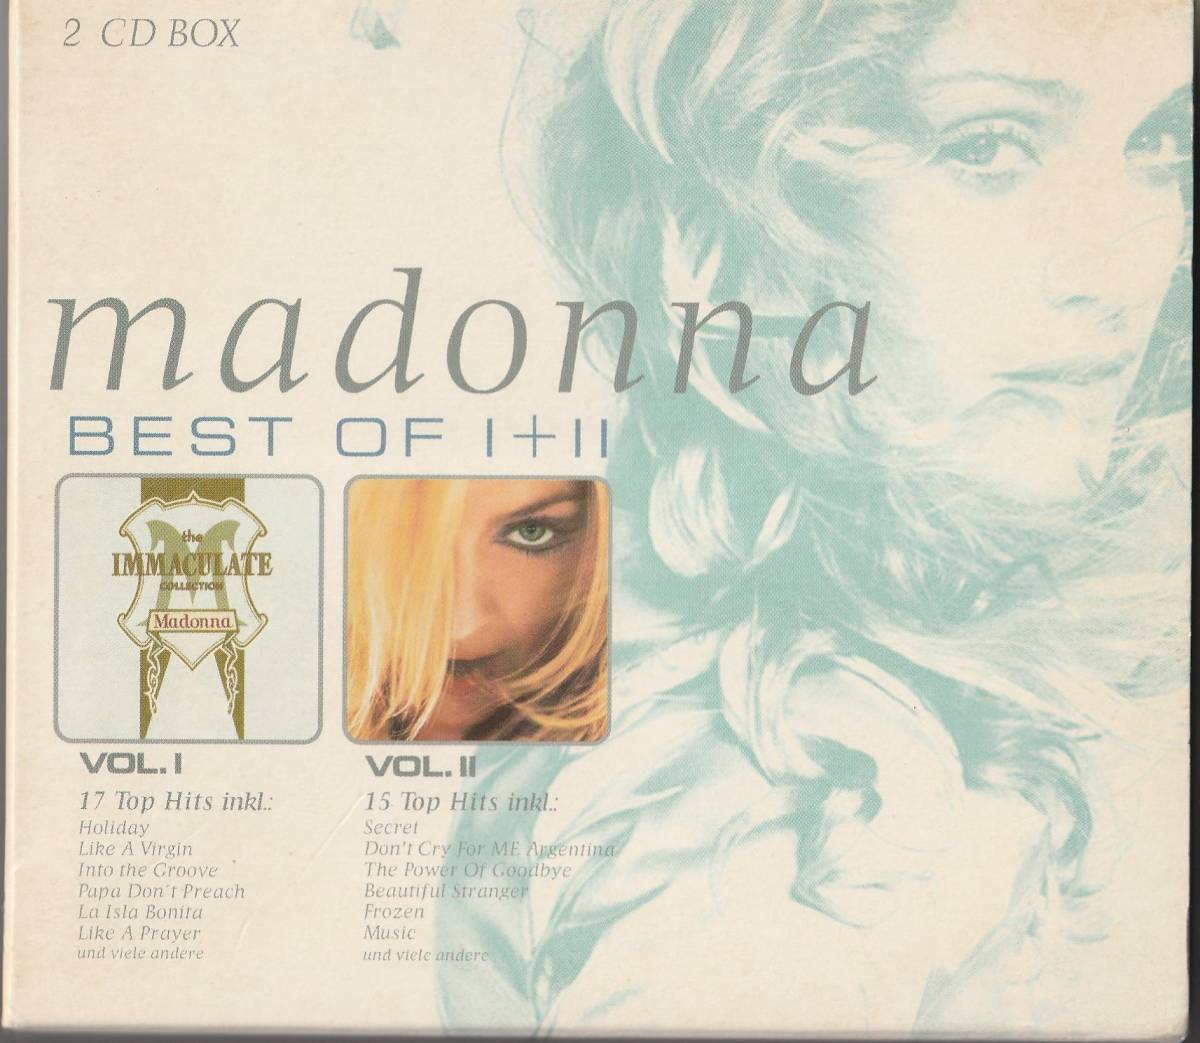 MADONNA　マドンナ　BEST OF Ⅰ + Ⅱ　限定盤 2枚組 CDボックスセット　：　The Immaculate Collection　/　GHV2_画像1